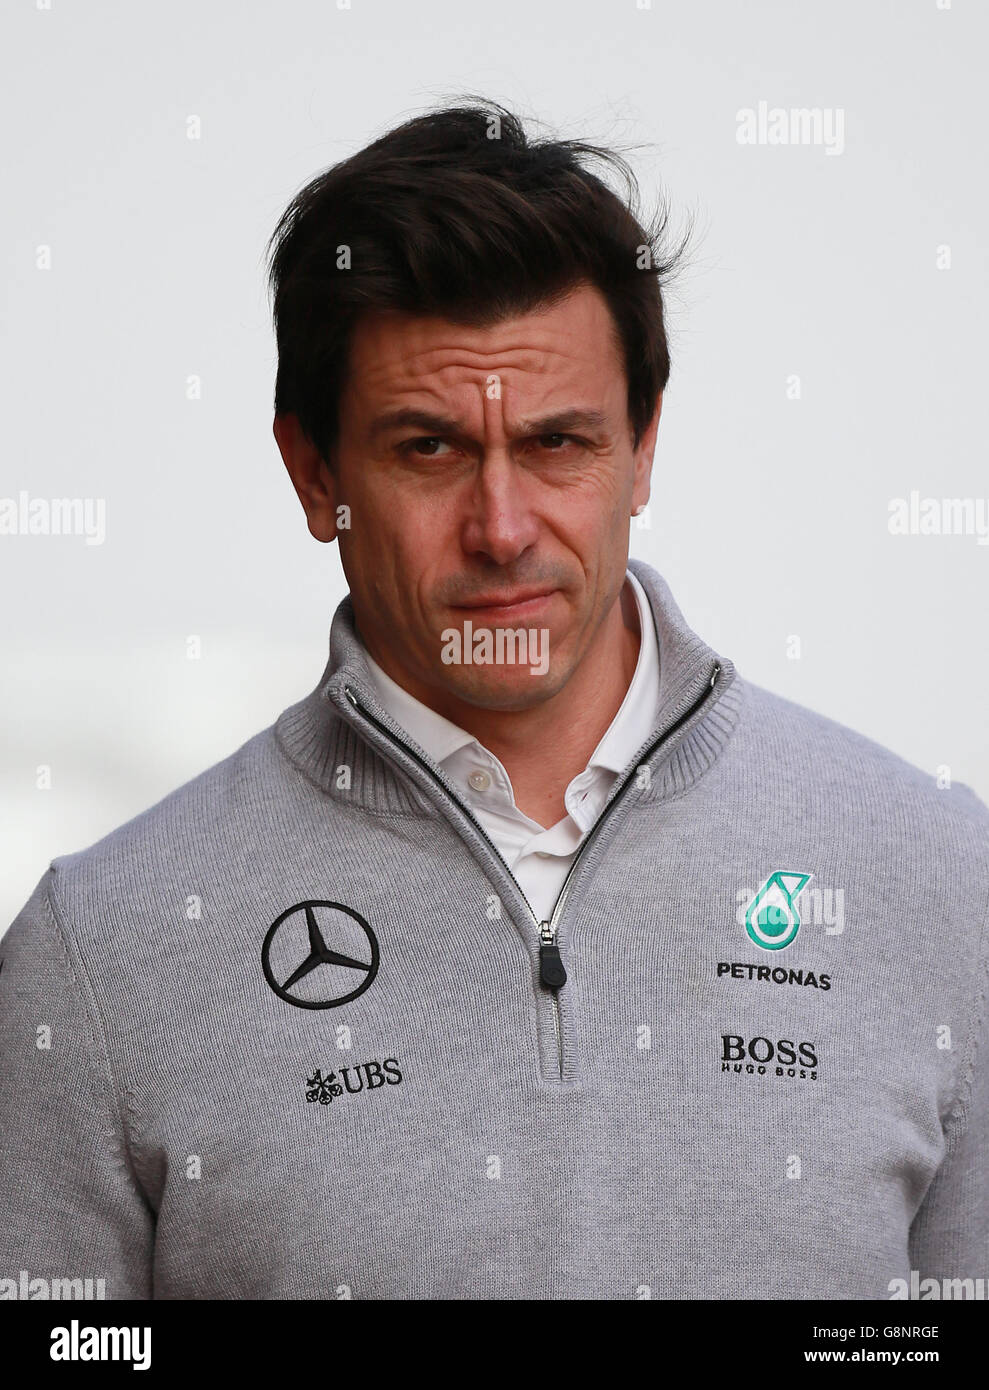 Mercedes team principle Toto Wolff during day one of testing at the Circuit de Catalunya, Barcelona. Stock Photo